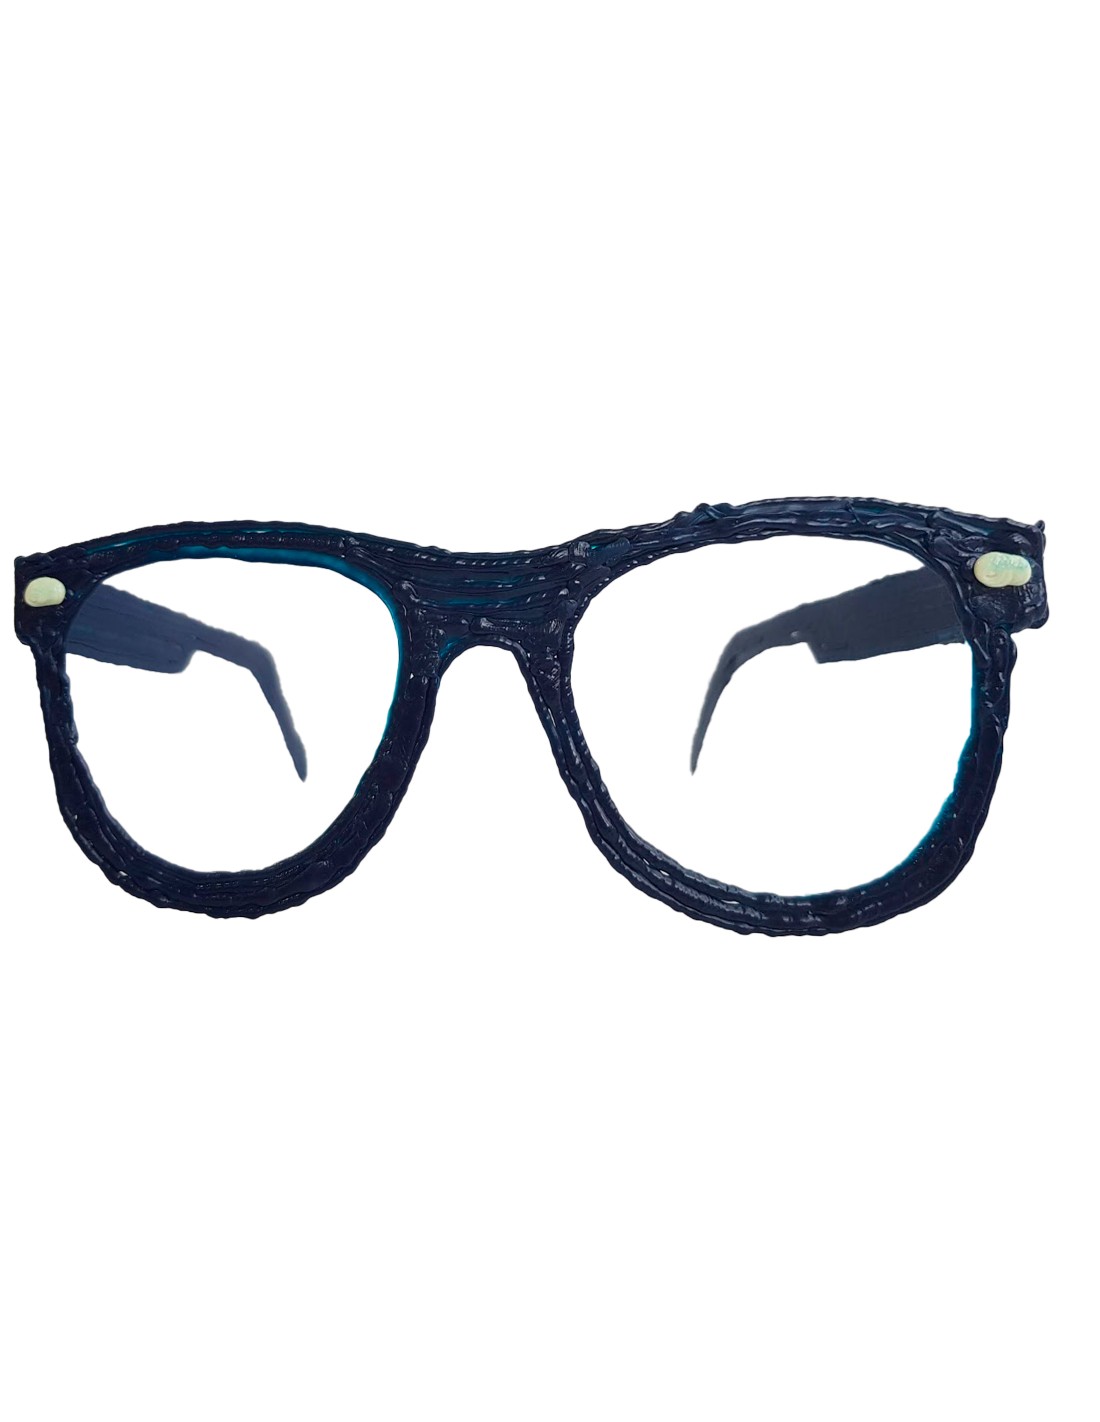 Glasses 4 Strict Free Template For A 3D Pen 